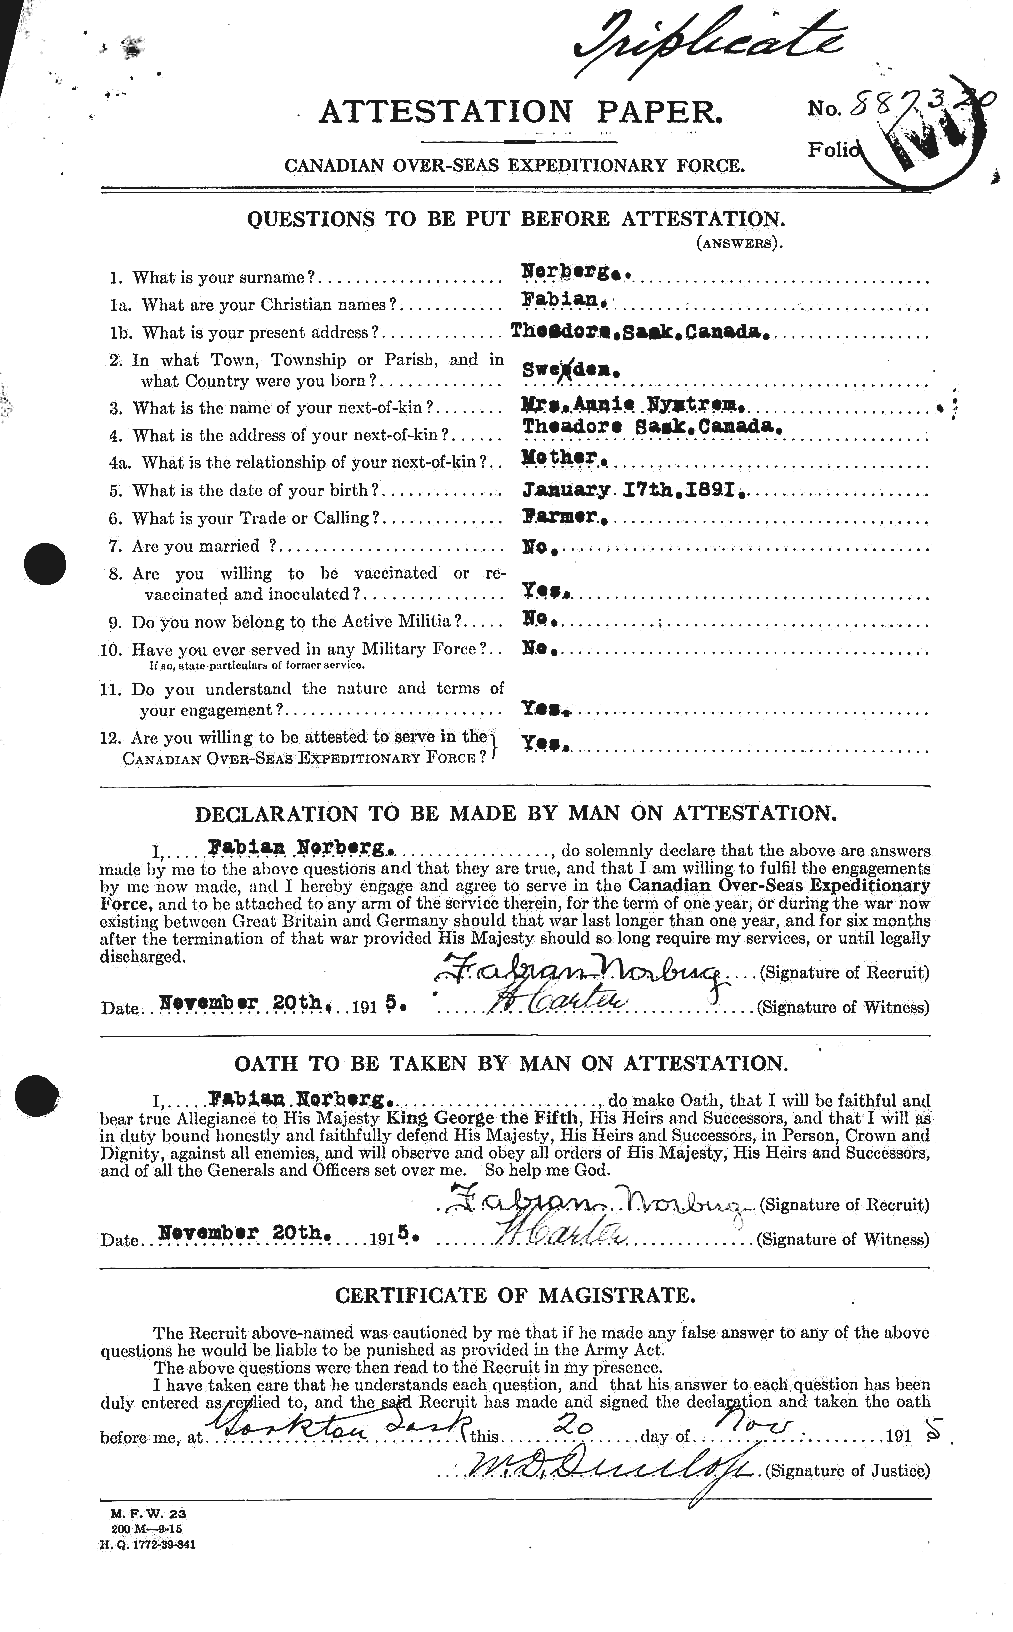 Personnel Records of the First World War - CEF 550160a